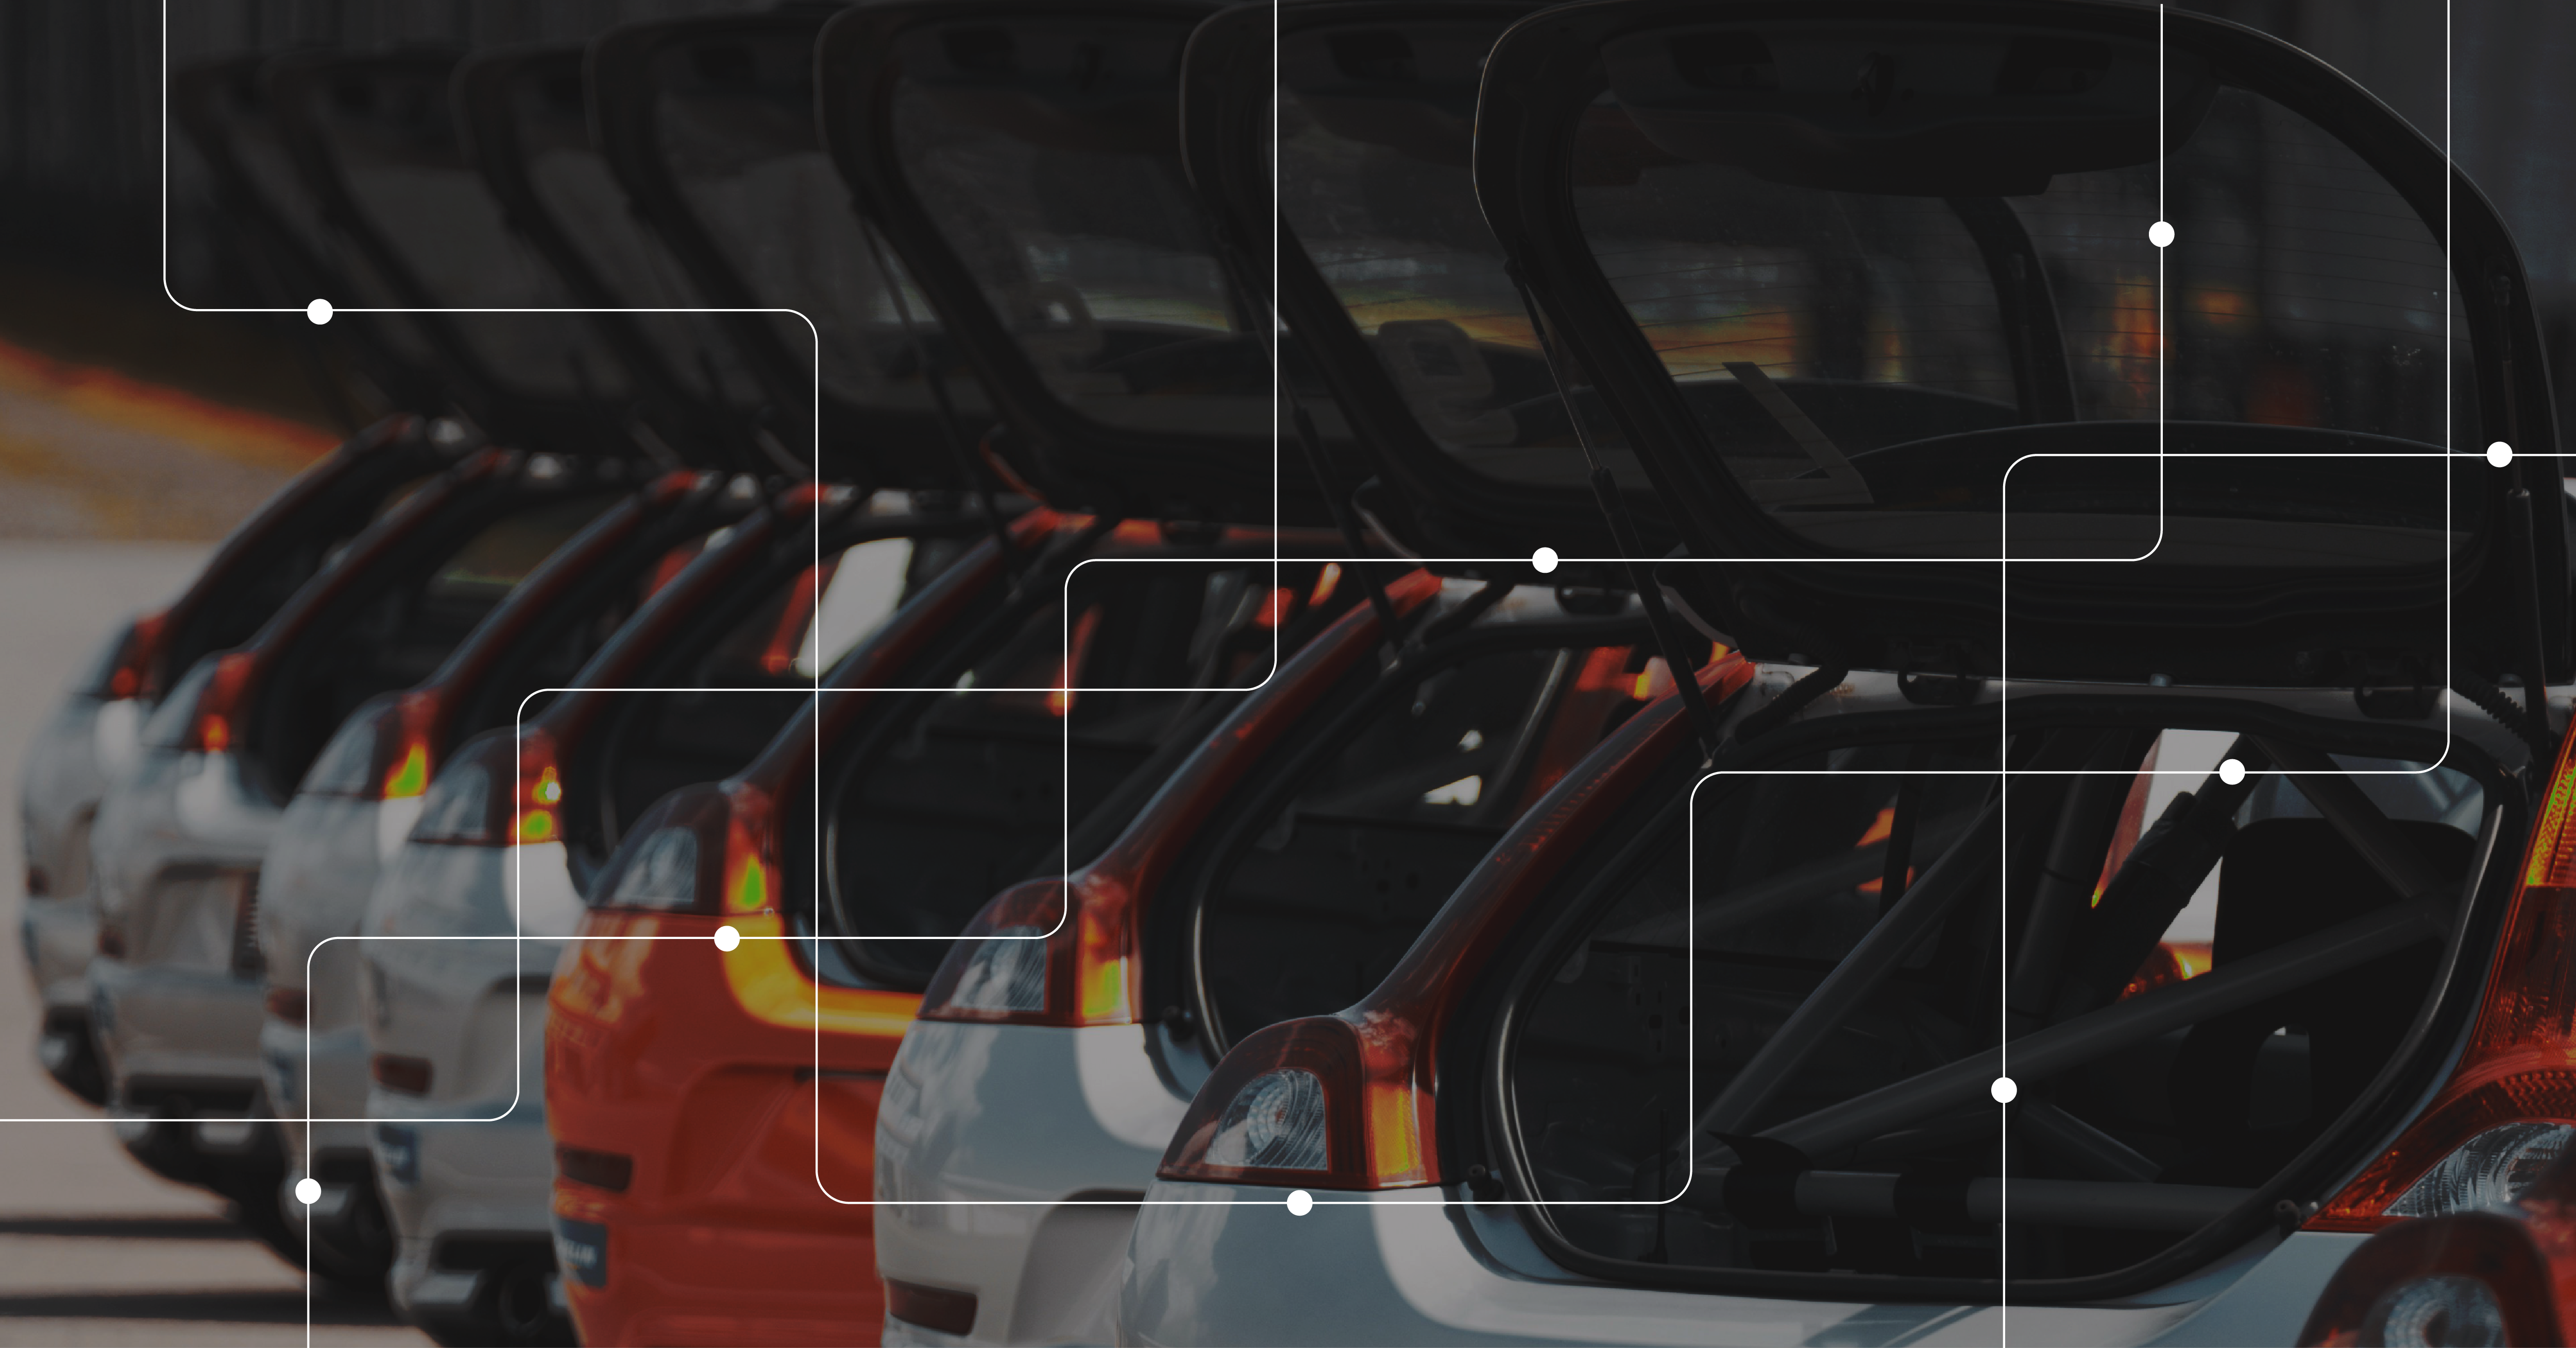 Supply Chain Challenges for the Automotive Industry